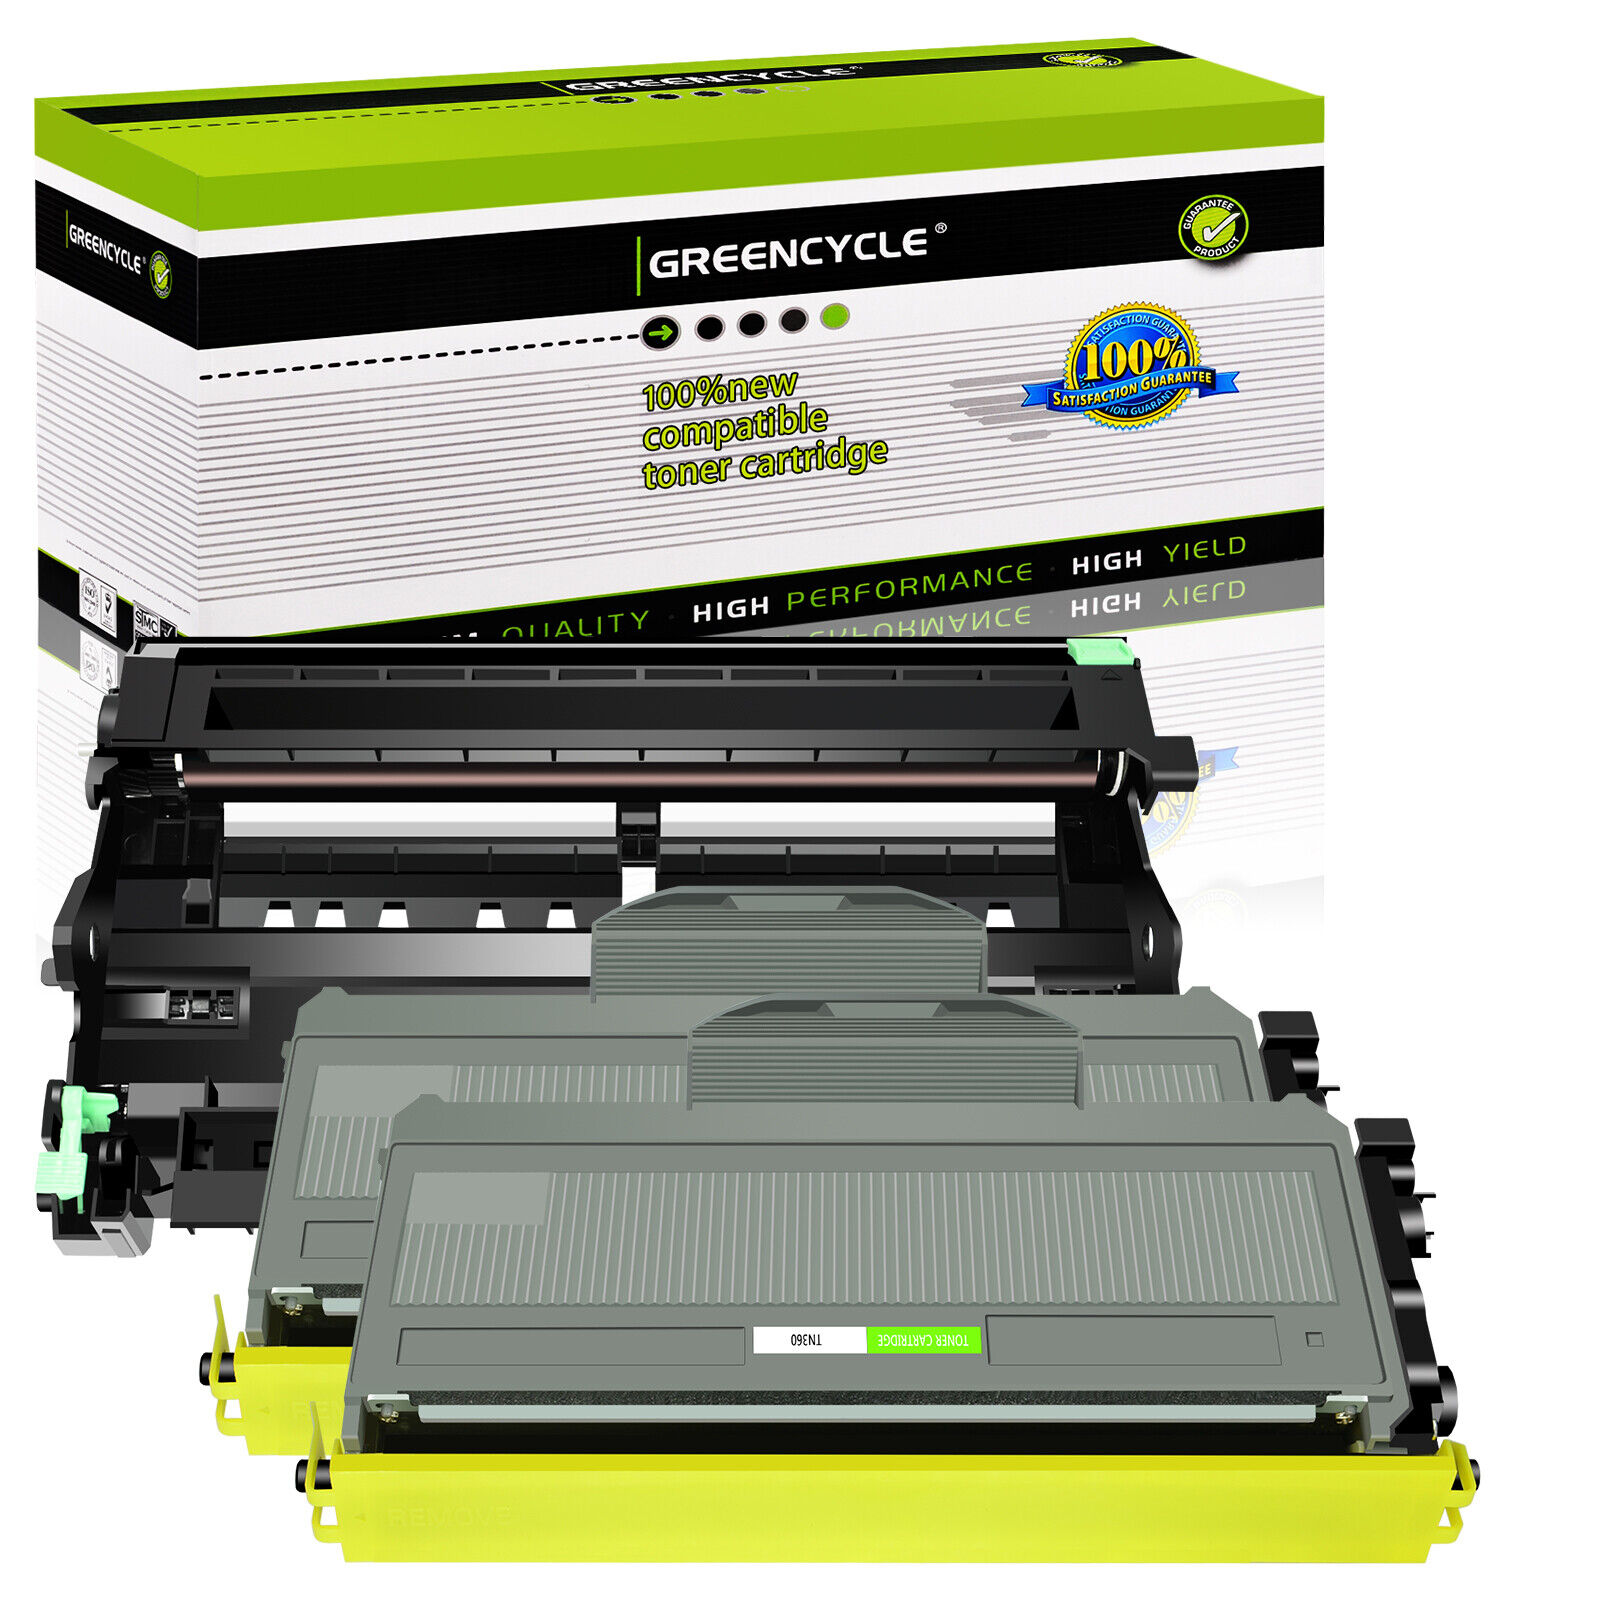 2PK TN360 Toner + 1PK DR360 Drum For Brother DCP-7030 DCP-7040 DCP-7045N TN330